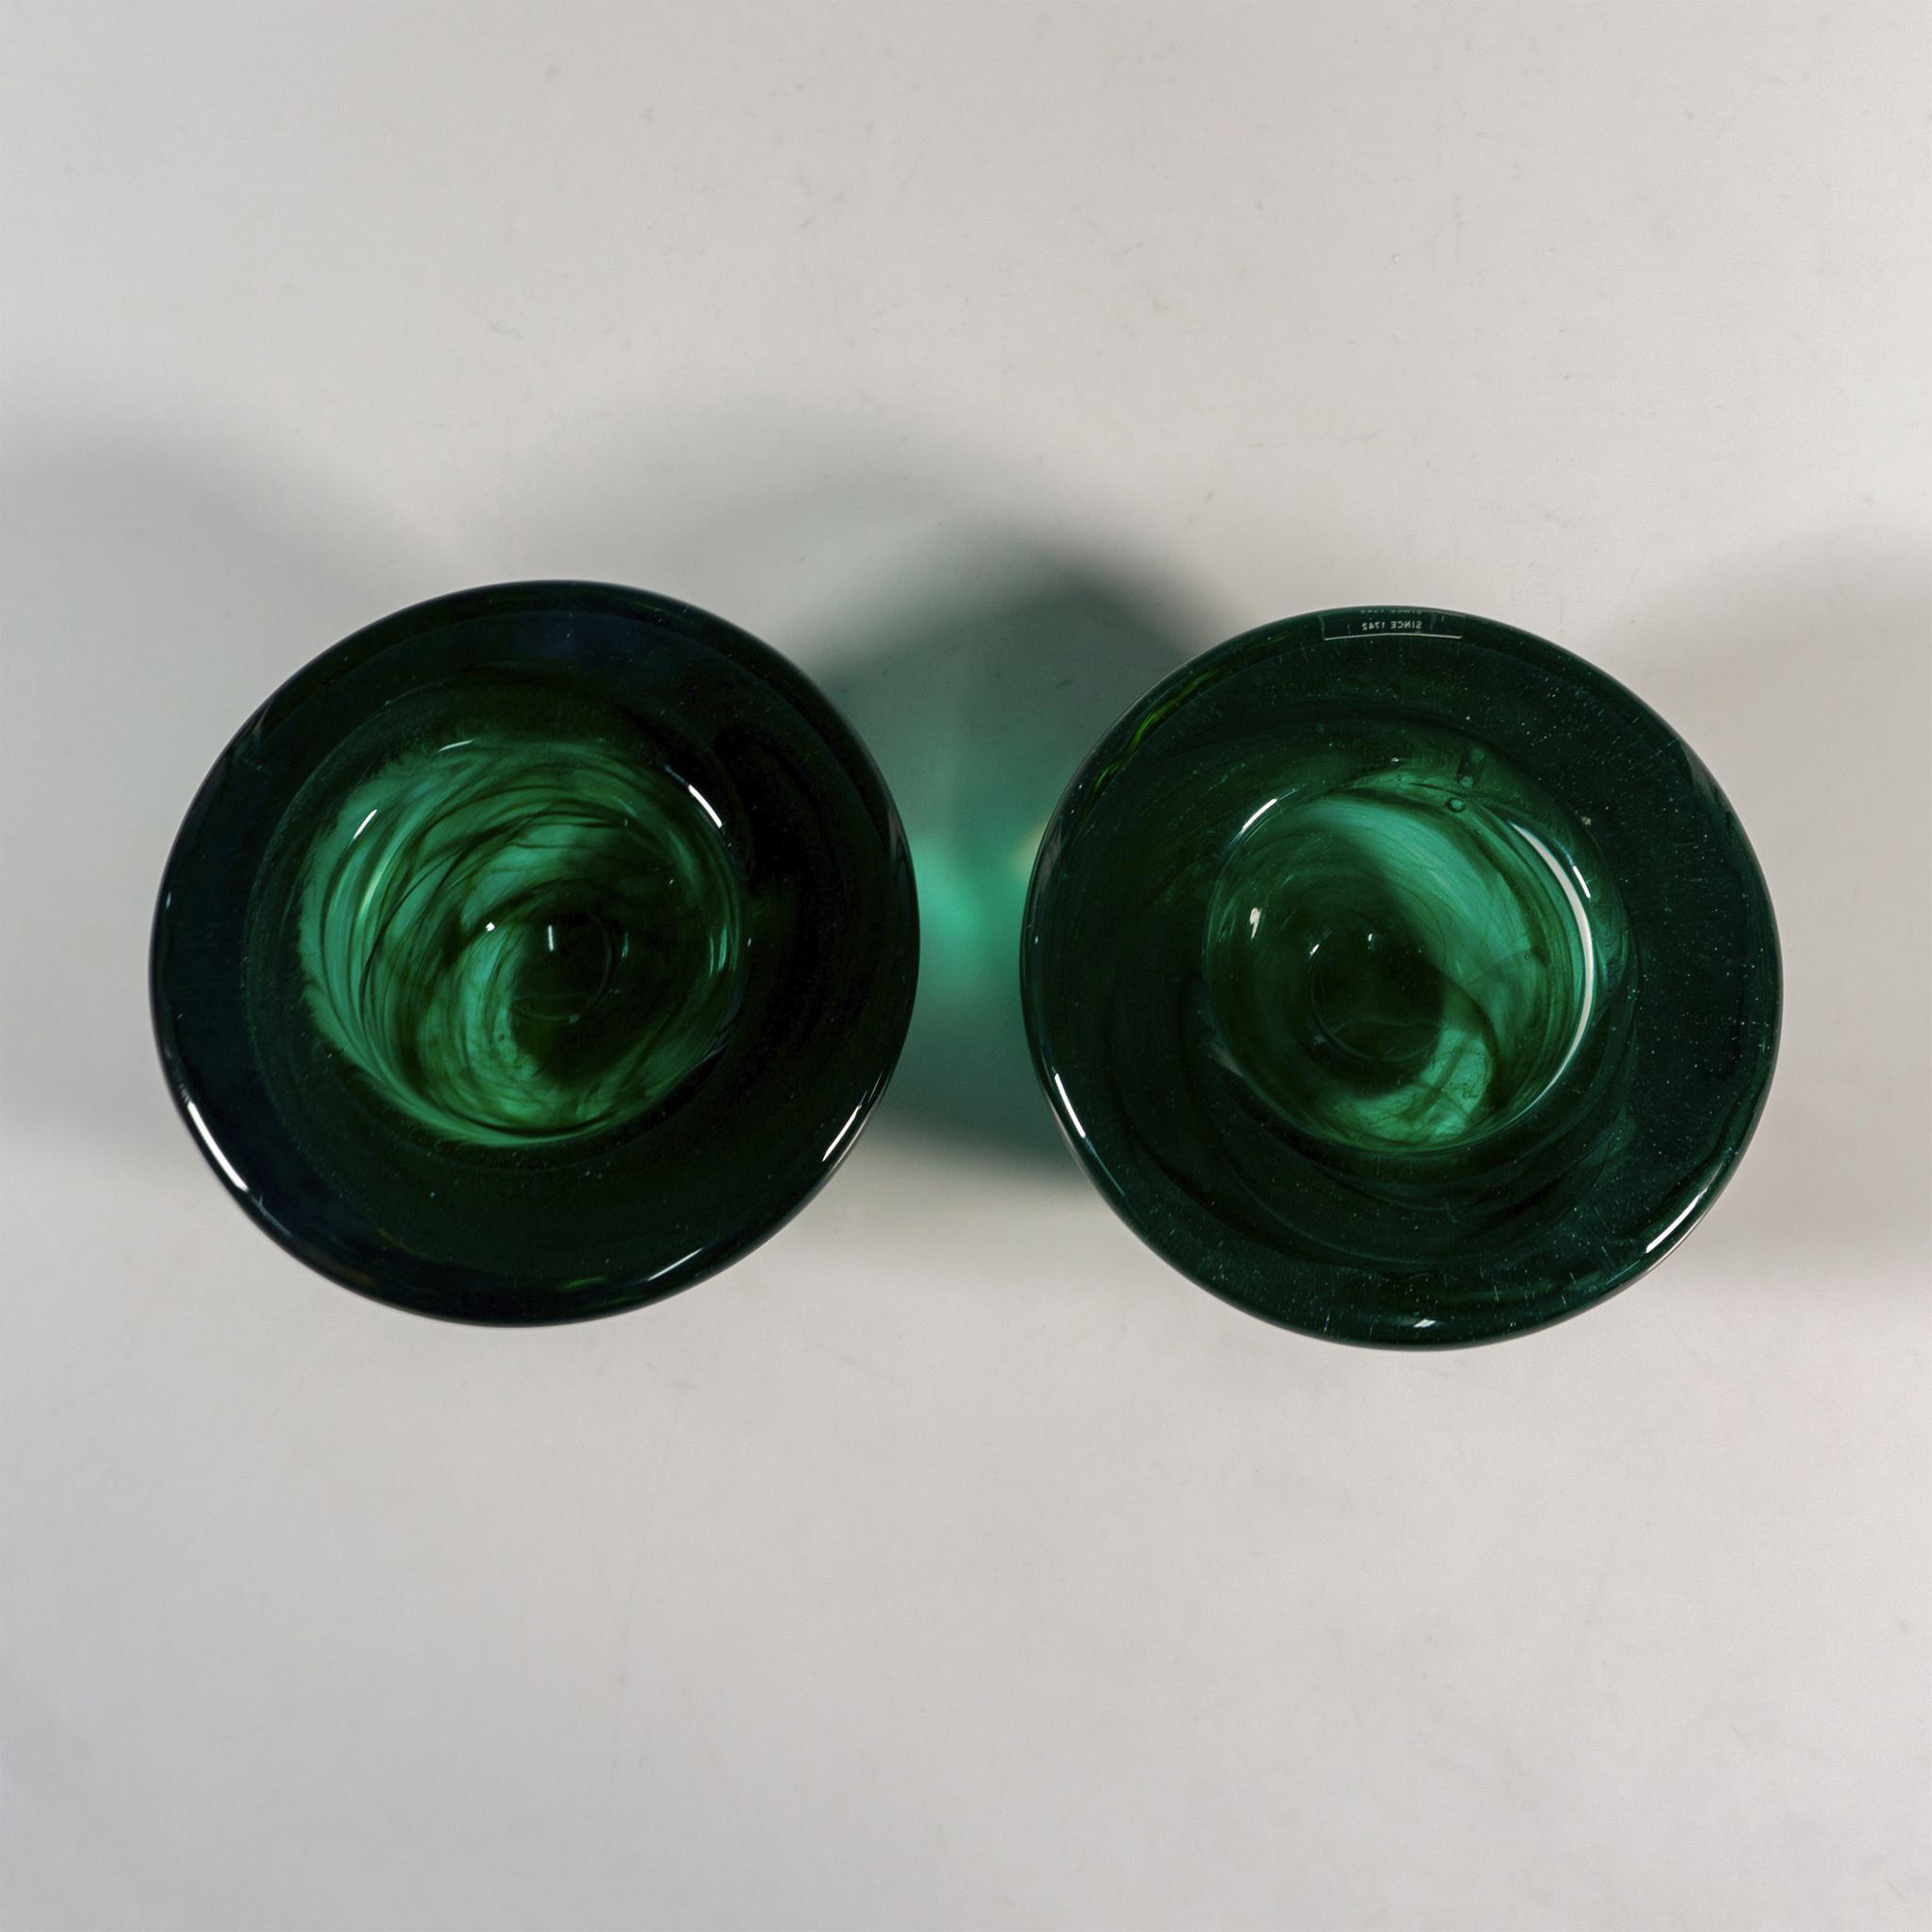 Pair of Kosta Boda by Anna Ehrner Candle Holders, Atoll - Image 4 of 5